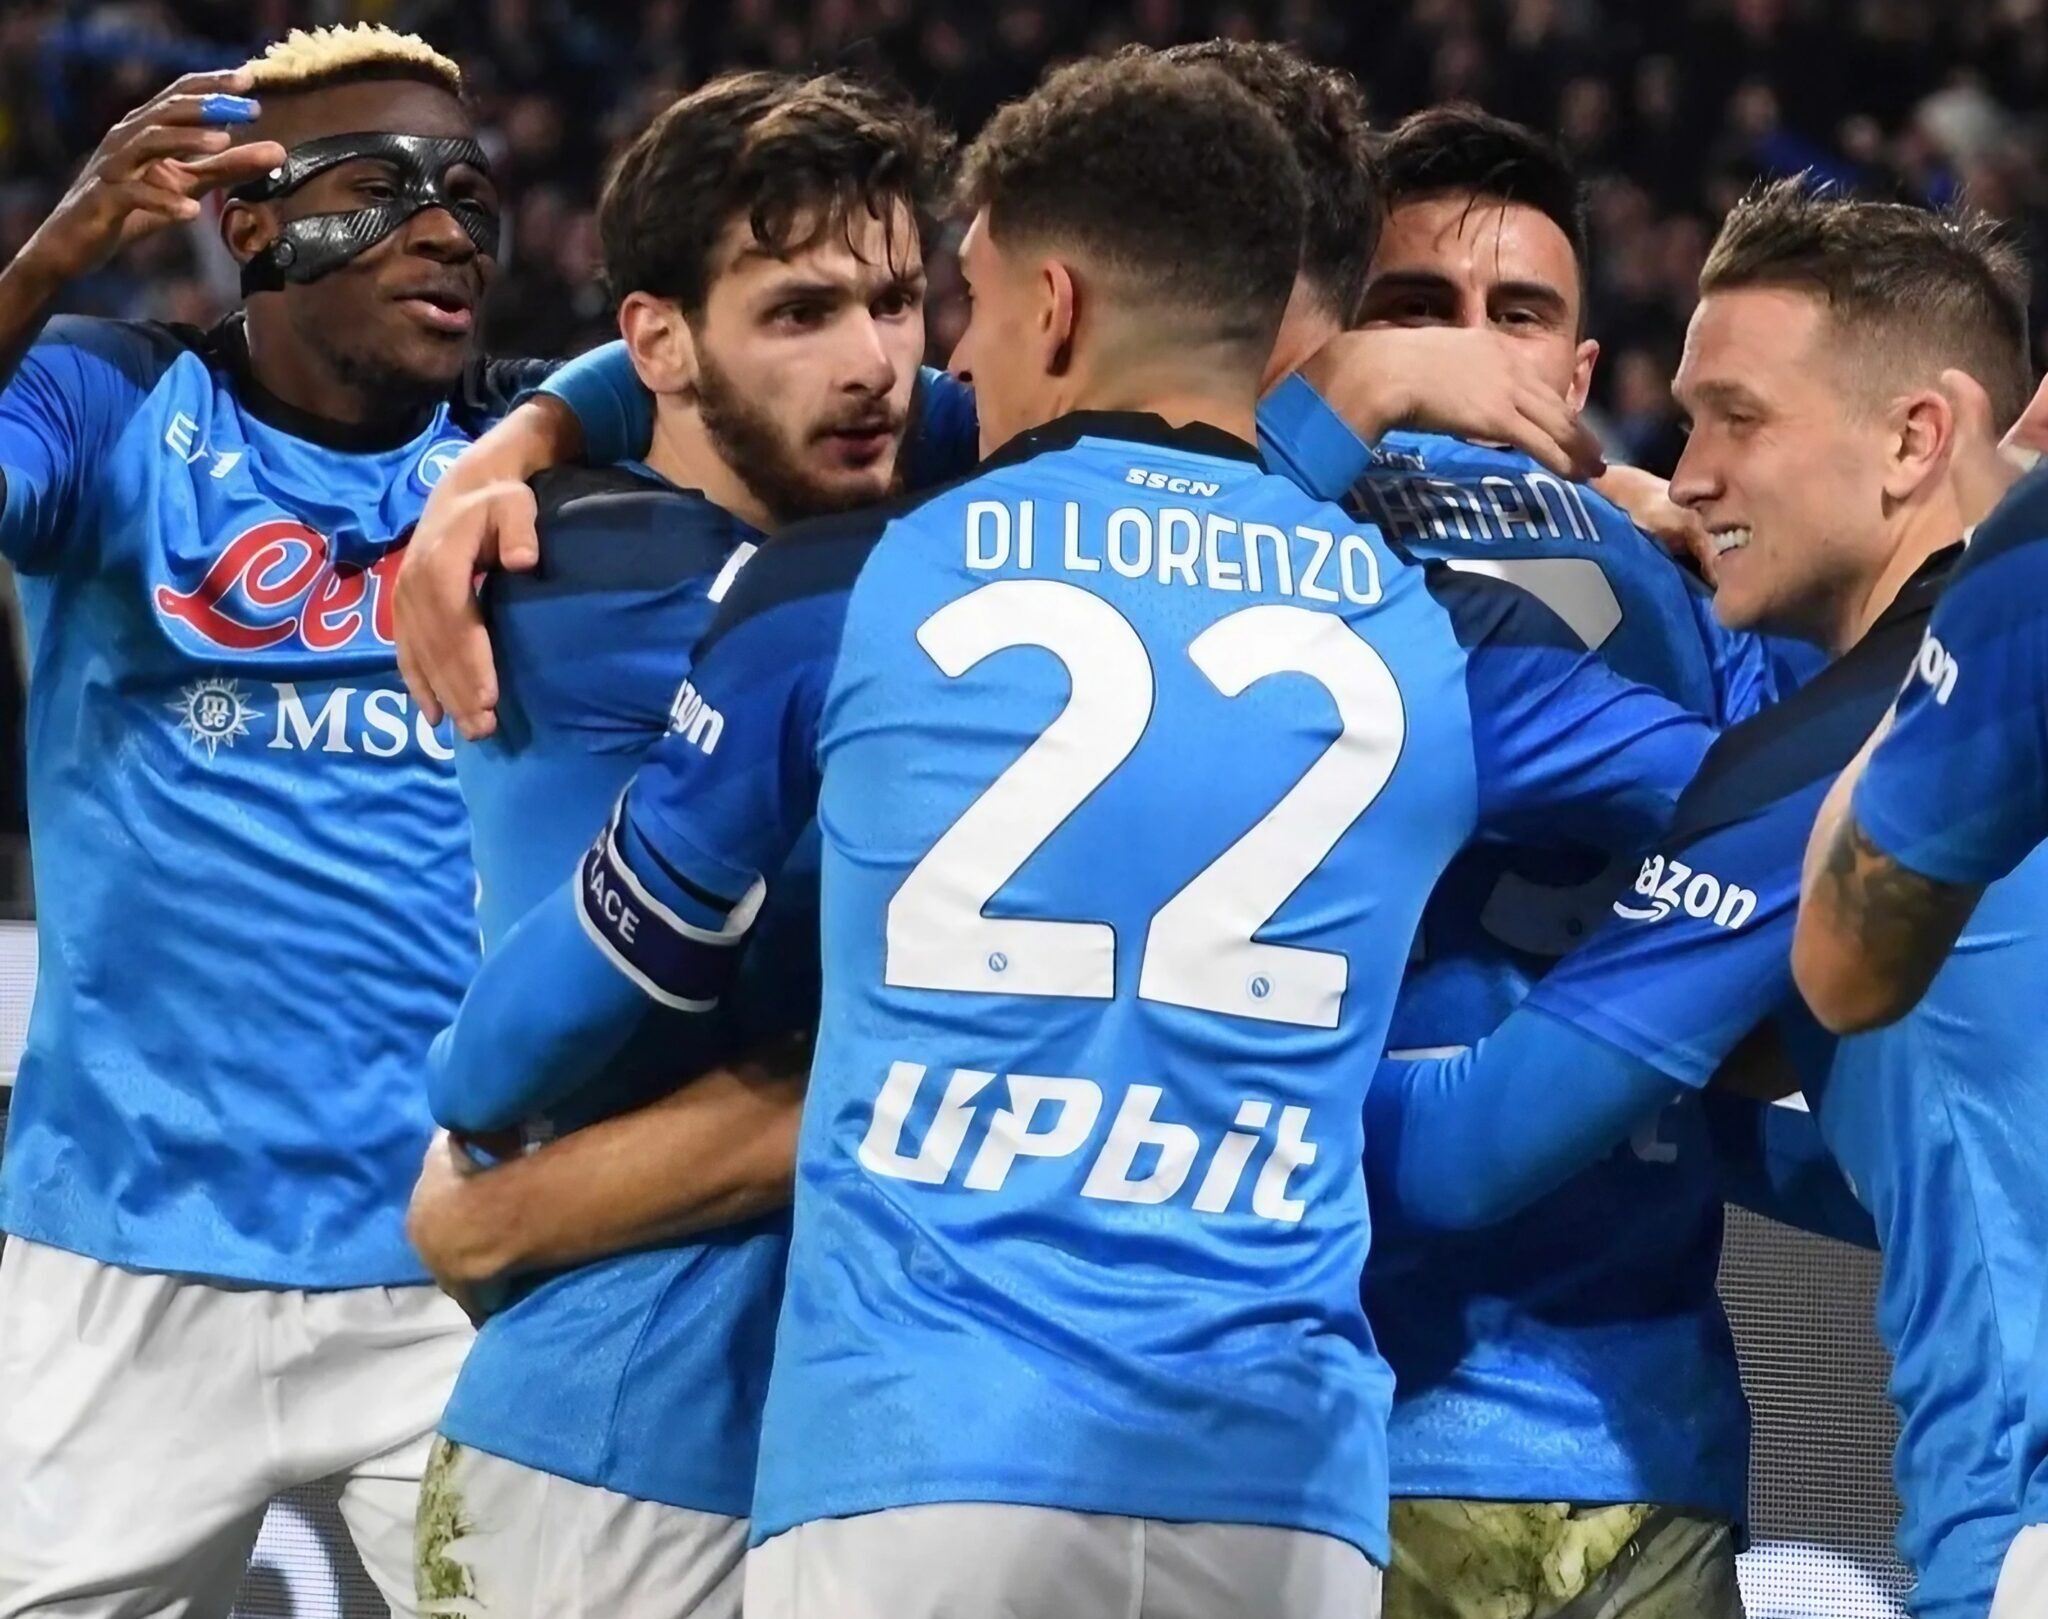 SSC Napoli players cheering after a goal